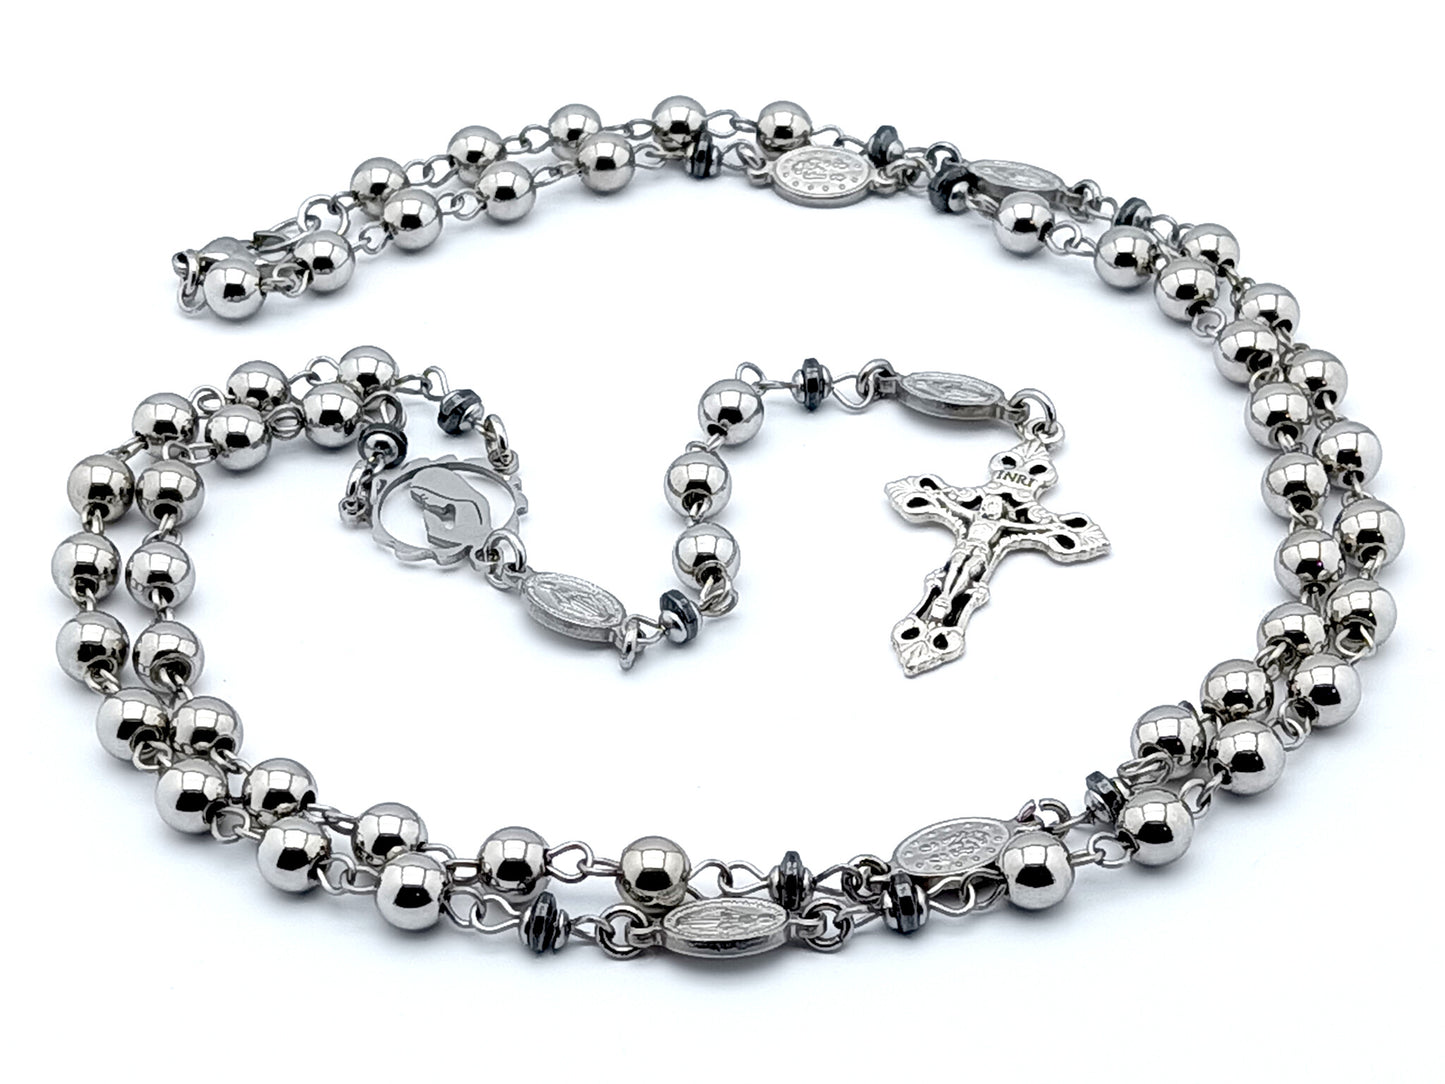 Miraculous medal unique rosary beads with stainless steel beads, centre medal and silver crucifix.